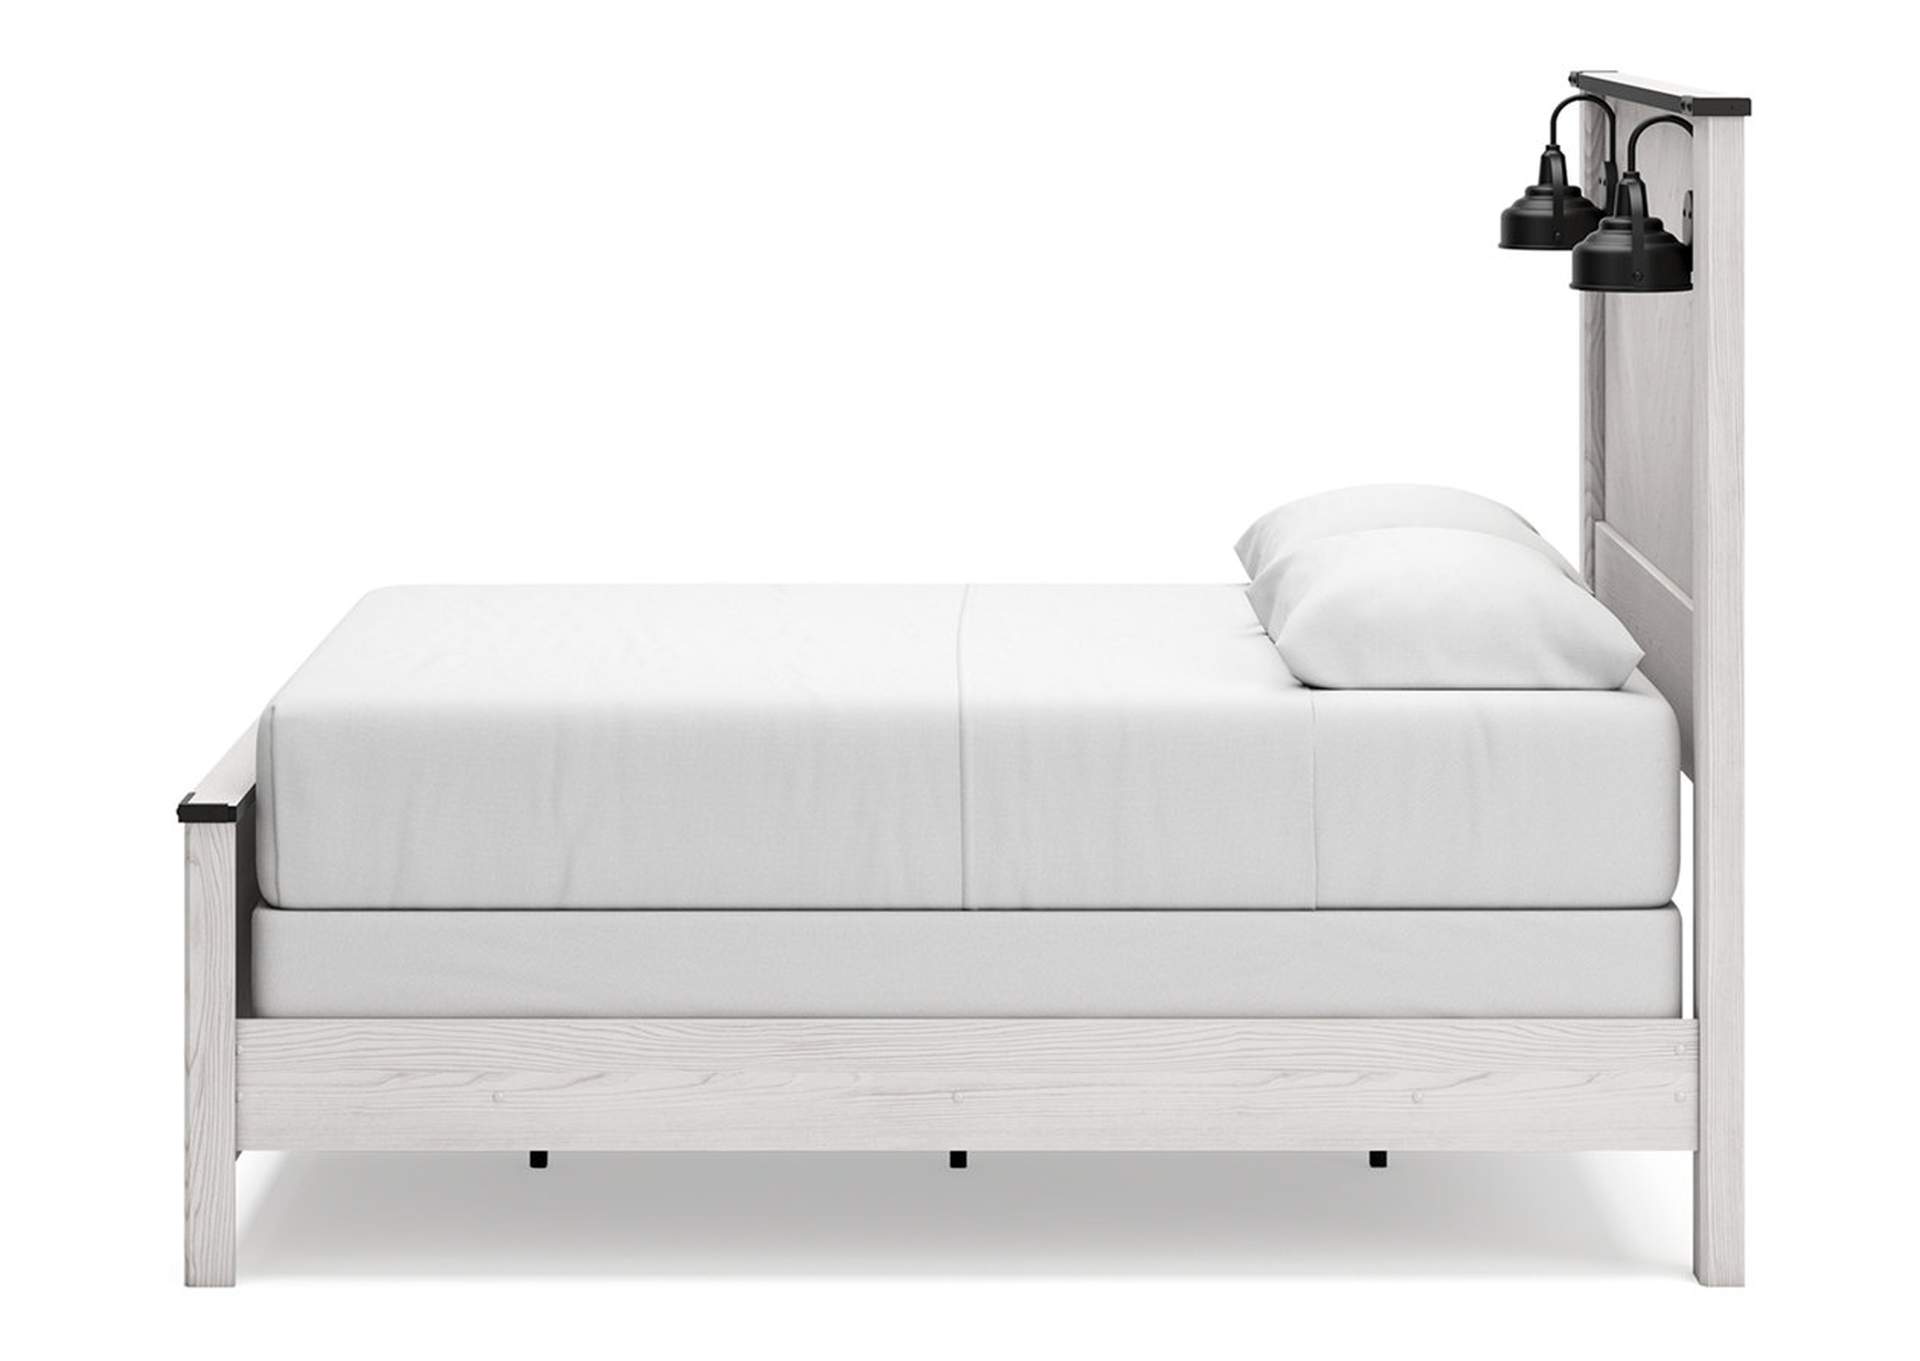 Schoenberg Queen Panel Bed,Signature Design By Ashley